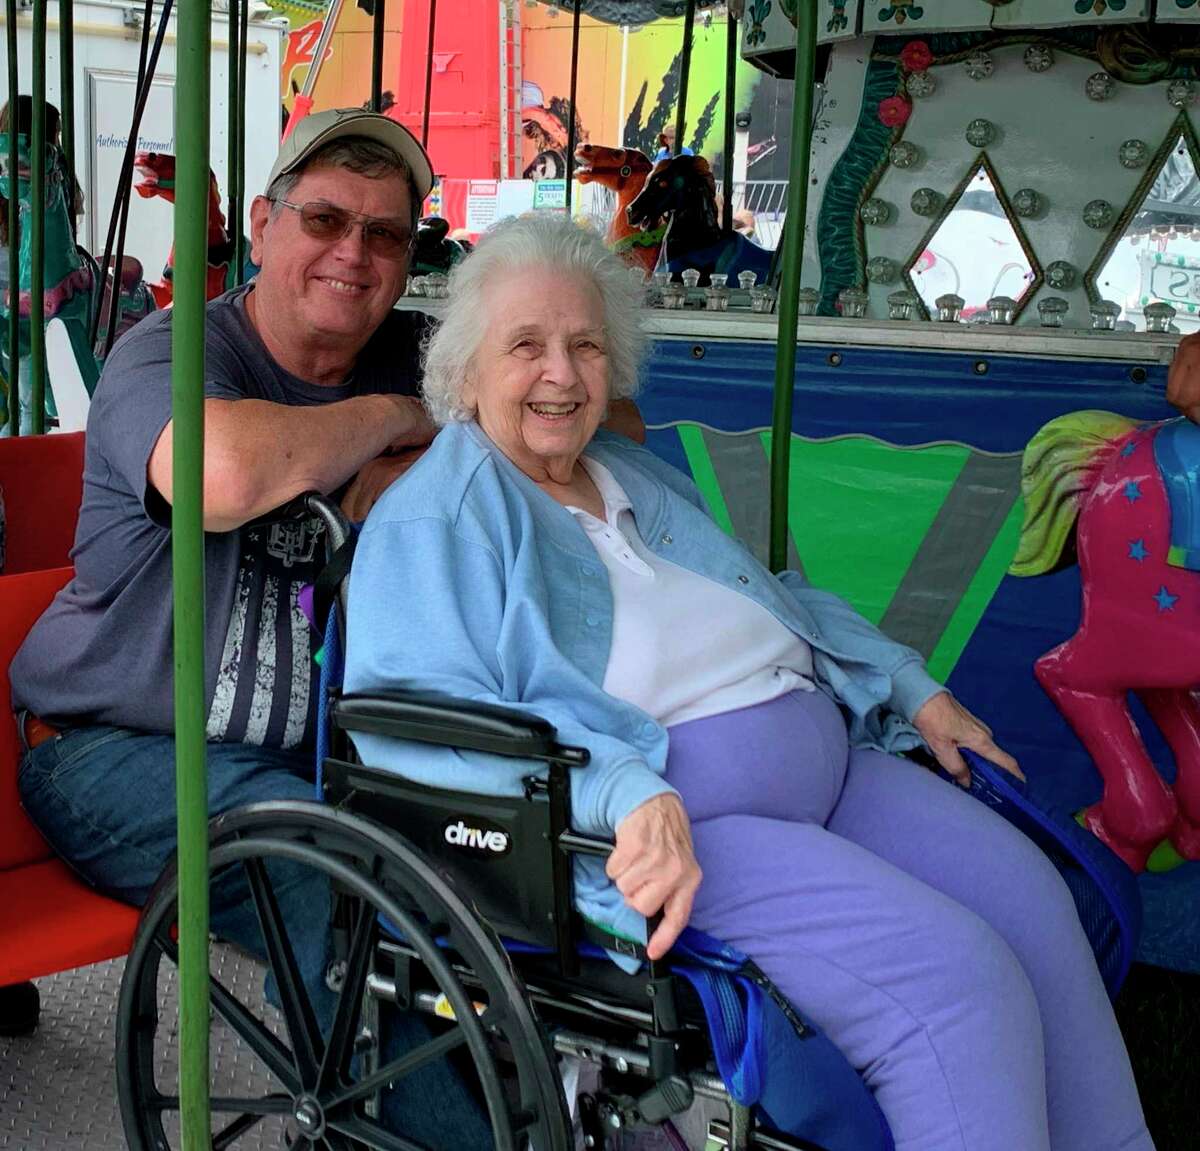 With the help of Skerbeck Family Carnival staff at the Mecosta County Fairgrounds, 95-year-old Mereda Bailey lived her longtime dream of riding the fair's colorful merry-go-round ride. (Courtesy/Nancy Stephan)